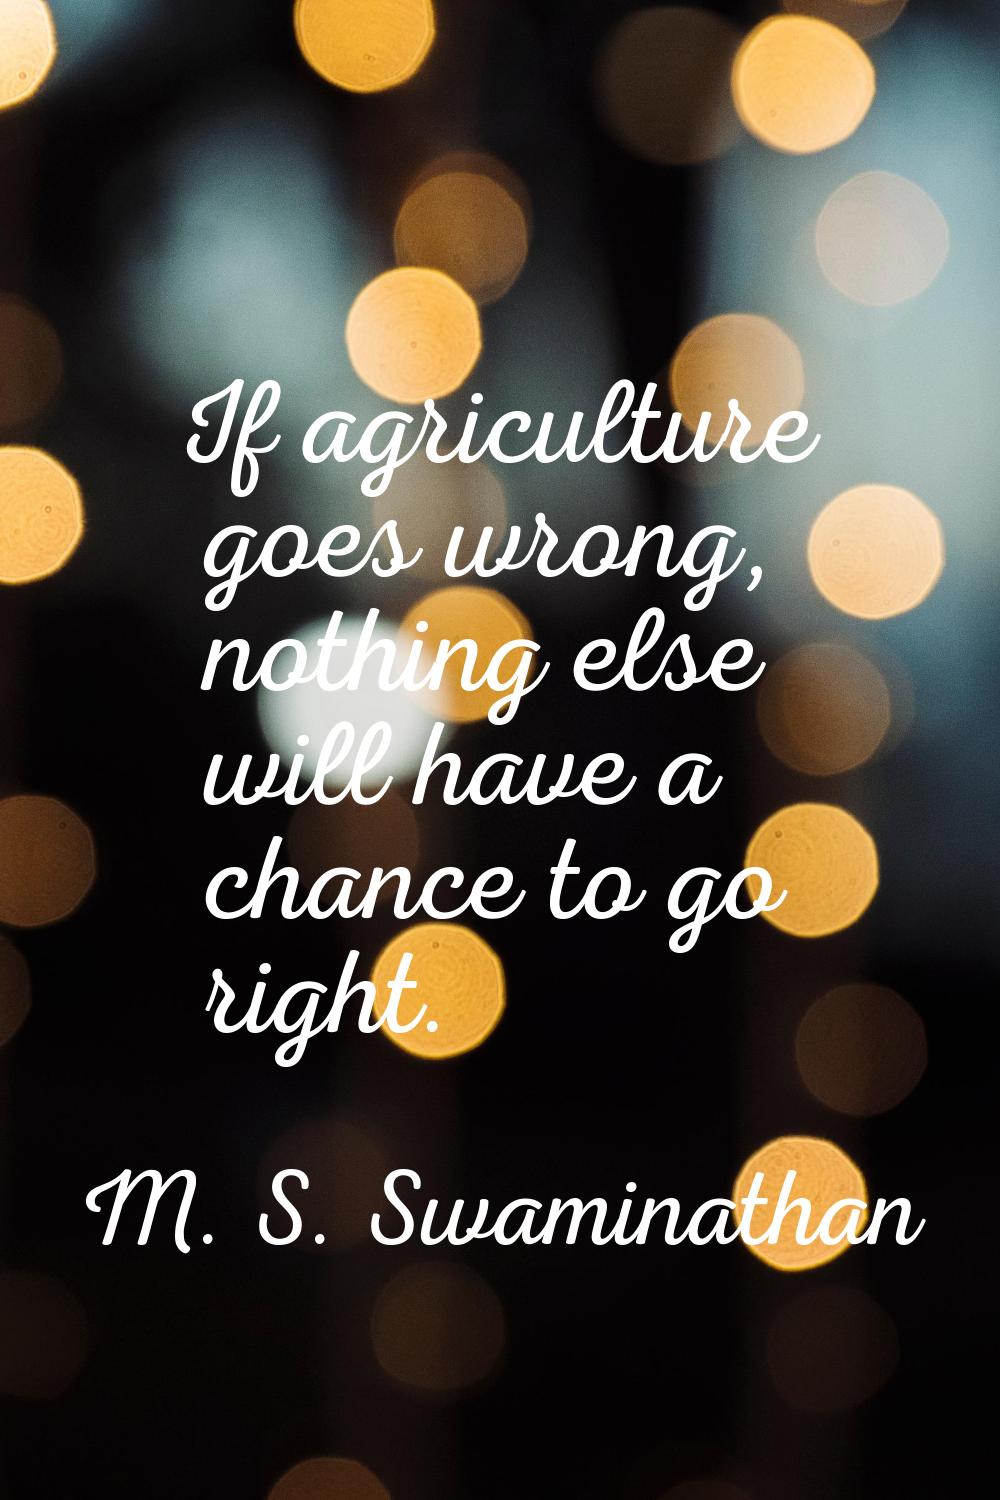 If agriculture goes wrong, nothing else will have a chance to go right.